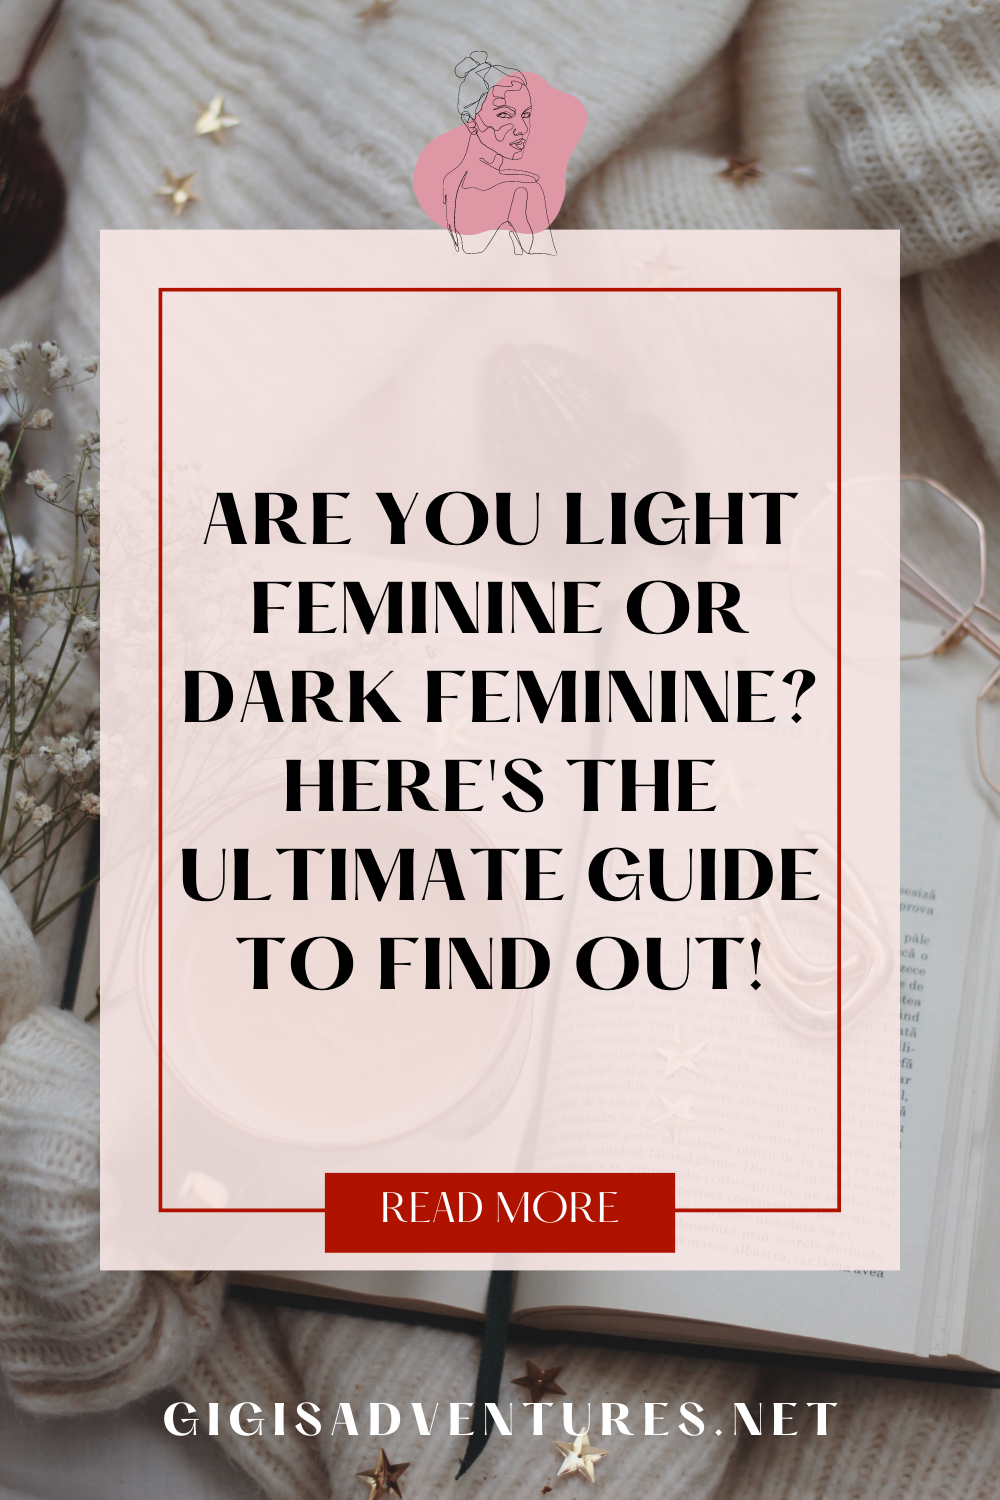 Are You Light Feminine or Dark Feminine? Here's The Ultimate Guide To Find Out!